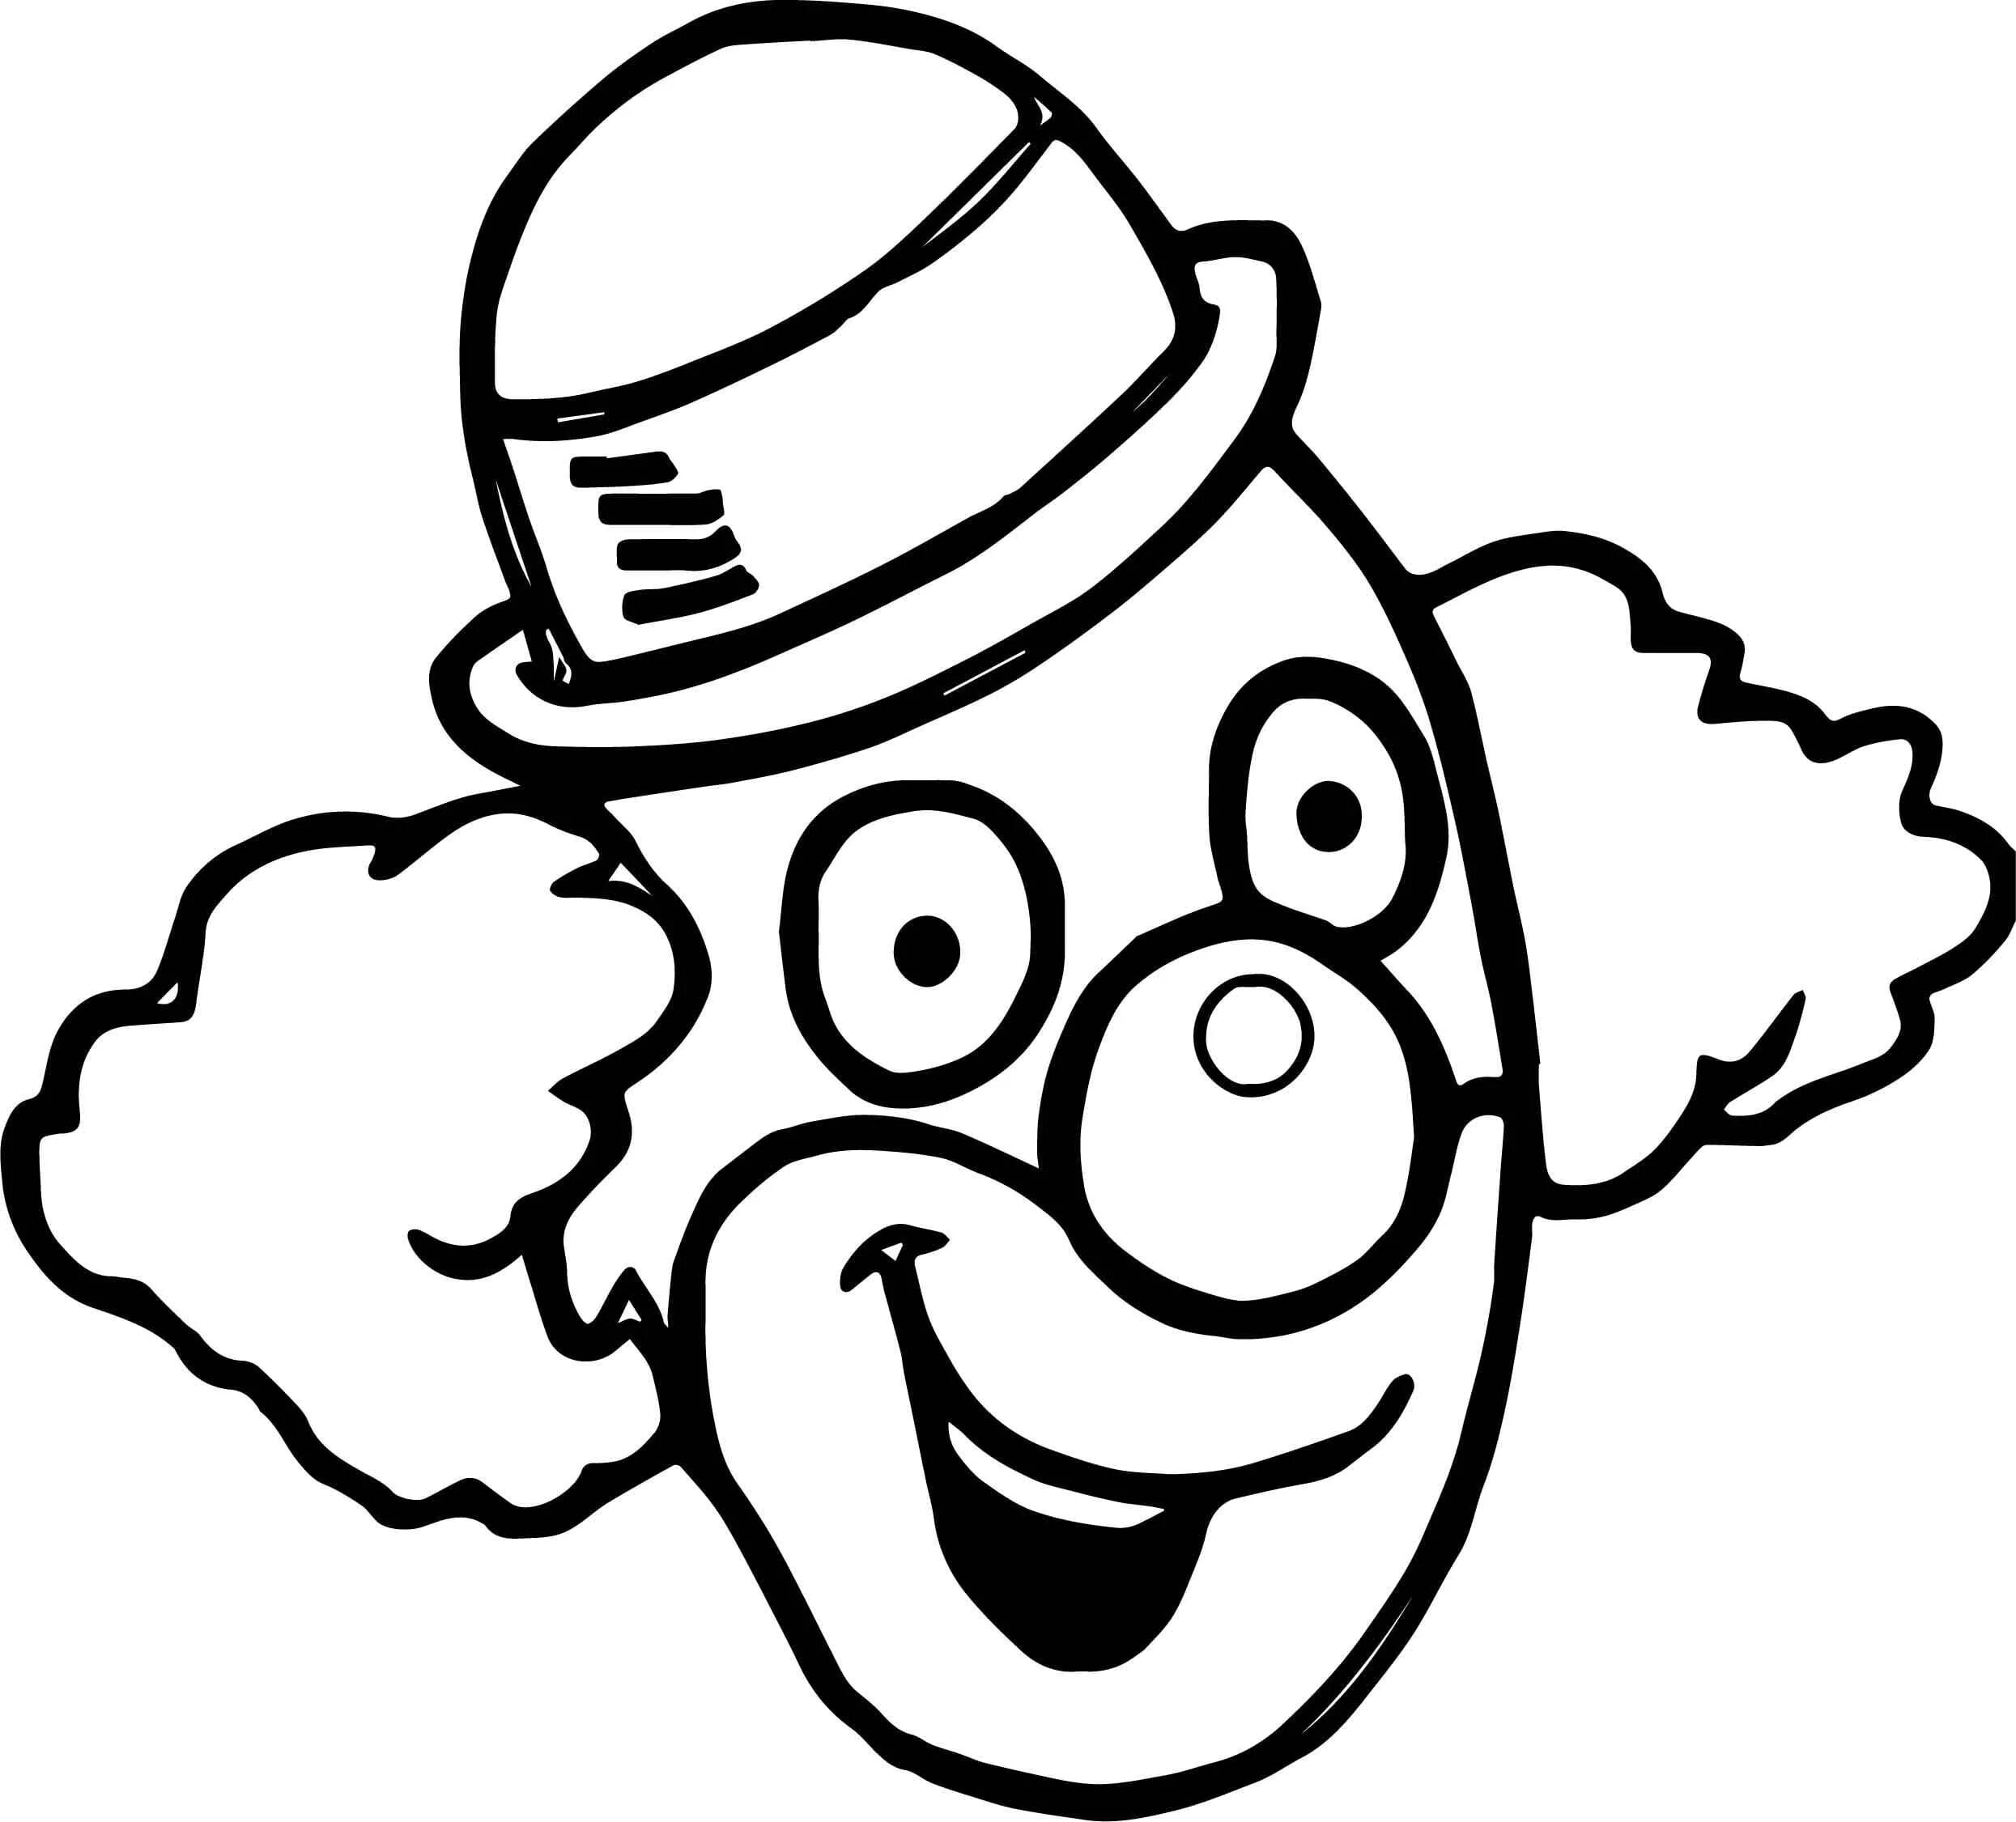 Coloring page gorgeous clown head